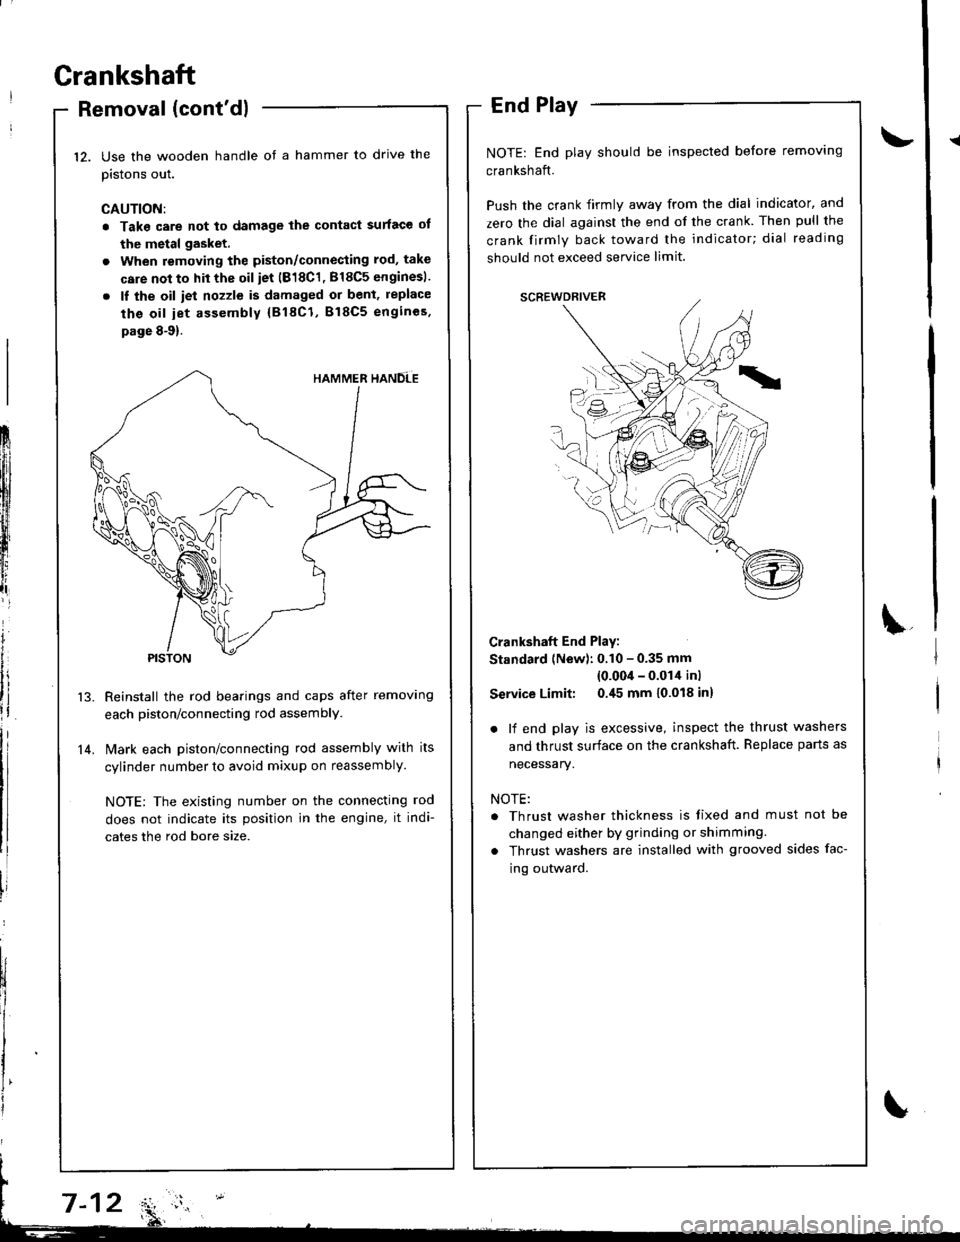 HONDA INTEGRA 1998 4.G Workshop Manual Grankshaft
Removal (contdl
Use the wooden handle ot a hammer to drive the
pistons out.
CAUTION:
. Take care not to damage the contact surface ot
the metal gasket.
. When removing the piston/connectin